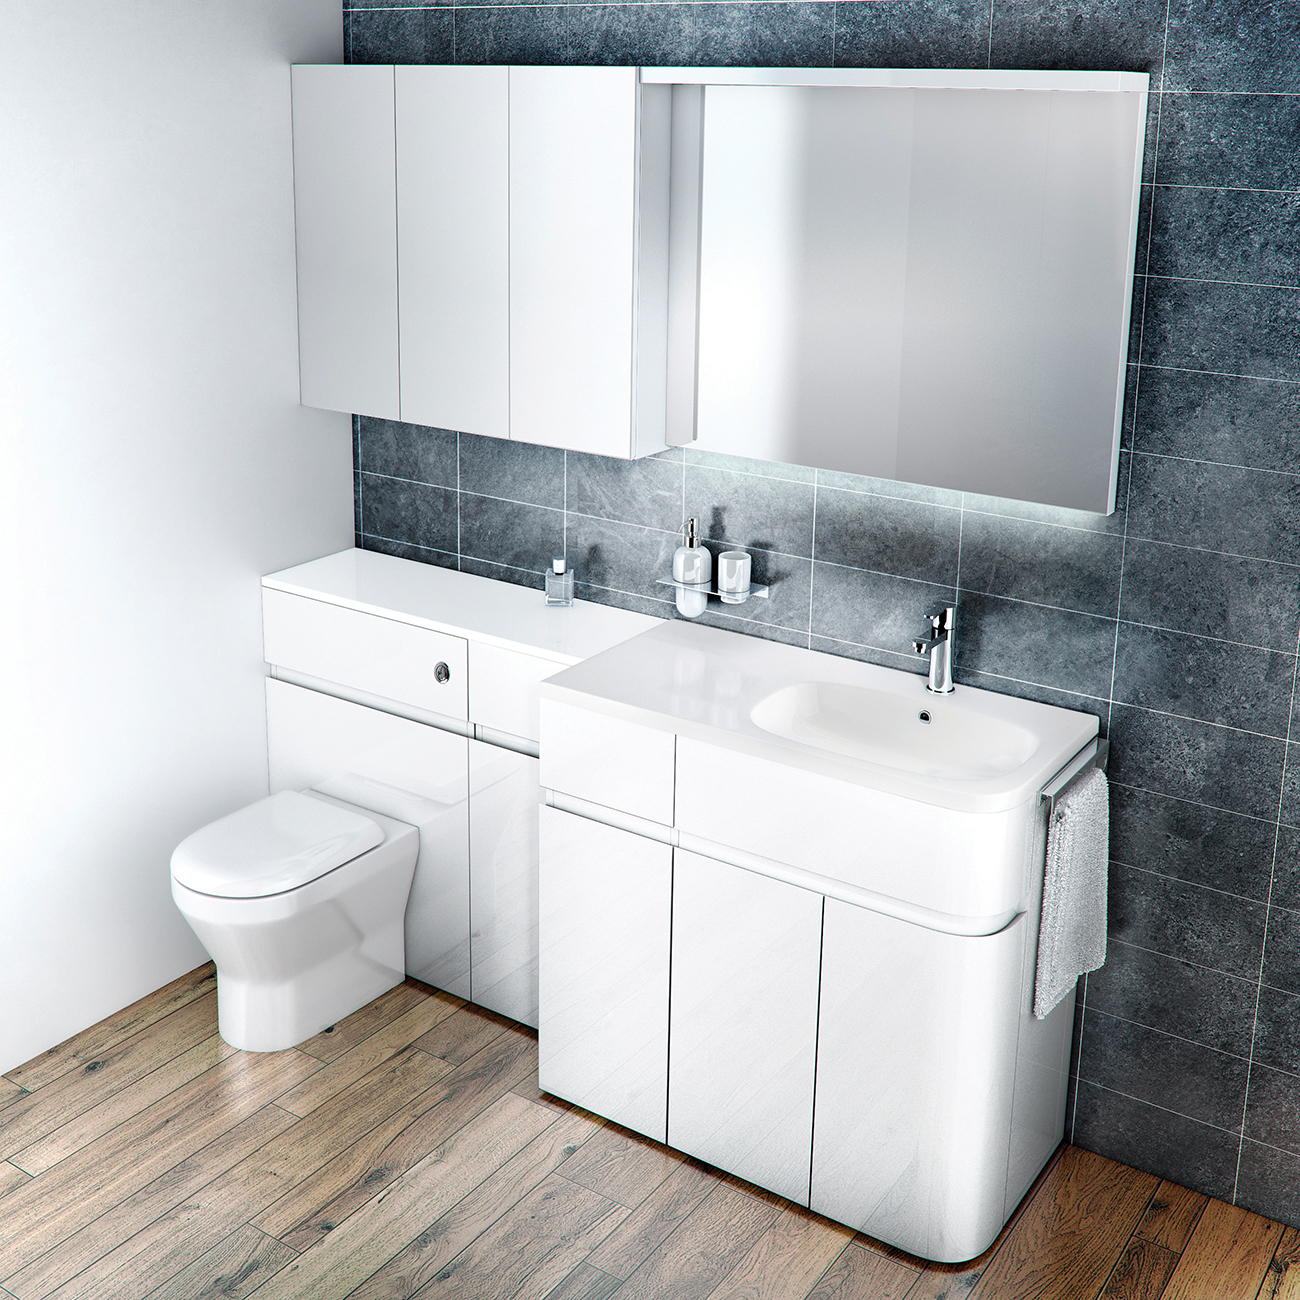 Aqua Cabinets D450 Fitted Bathroom Furniture Uk Bathroom intended for size 1300 X 1300